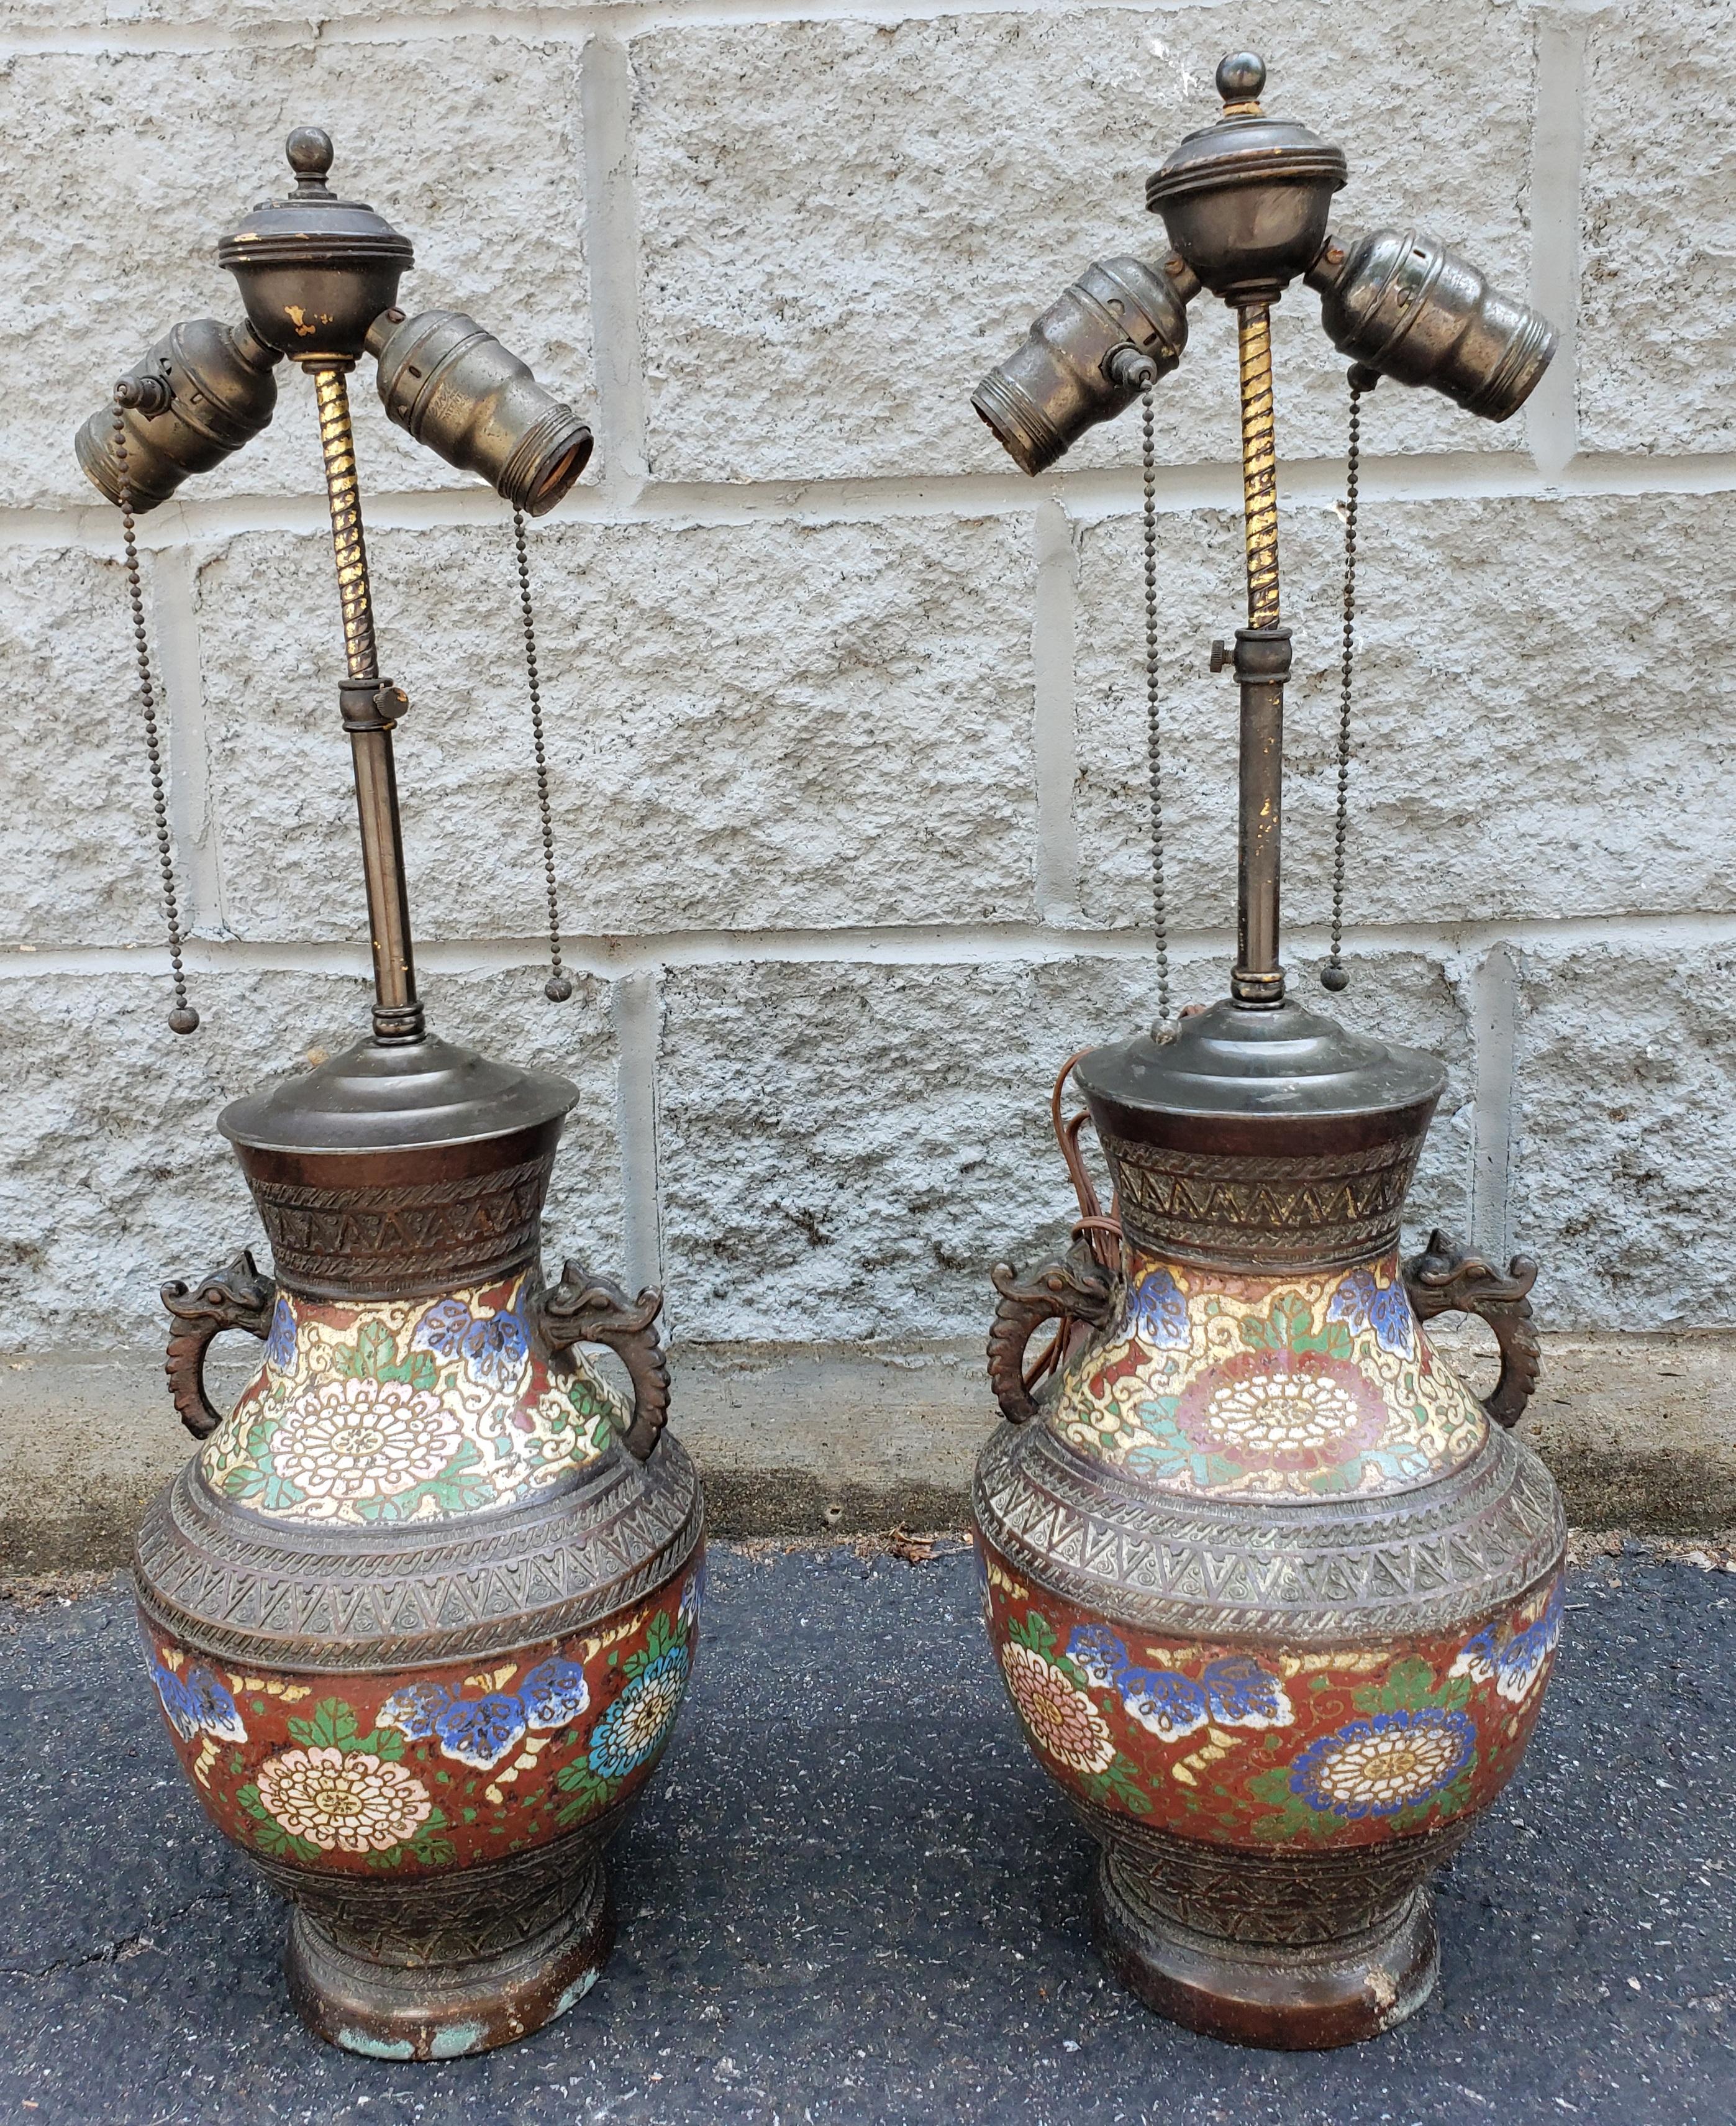 A Pair of 19th century Japanese Meiji Bronze Champleve and Cloisonne Enameled Vases Mounted as Lamps.
Very rare pair. 8